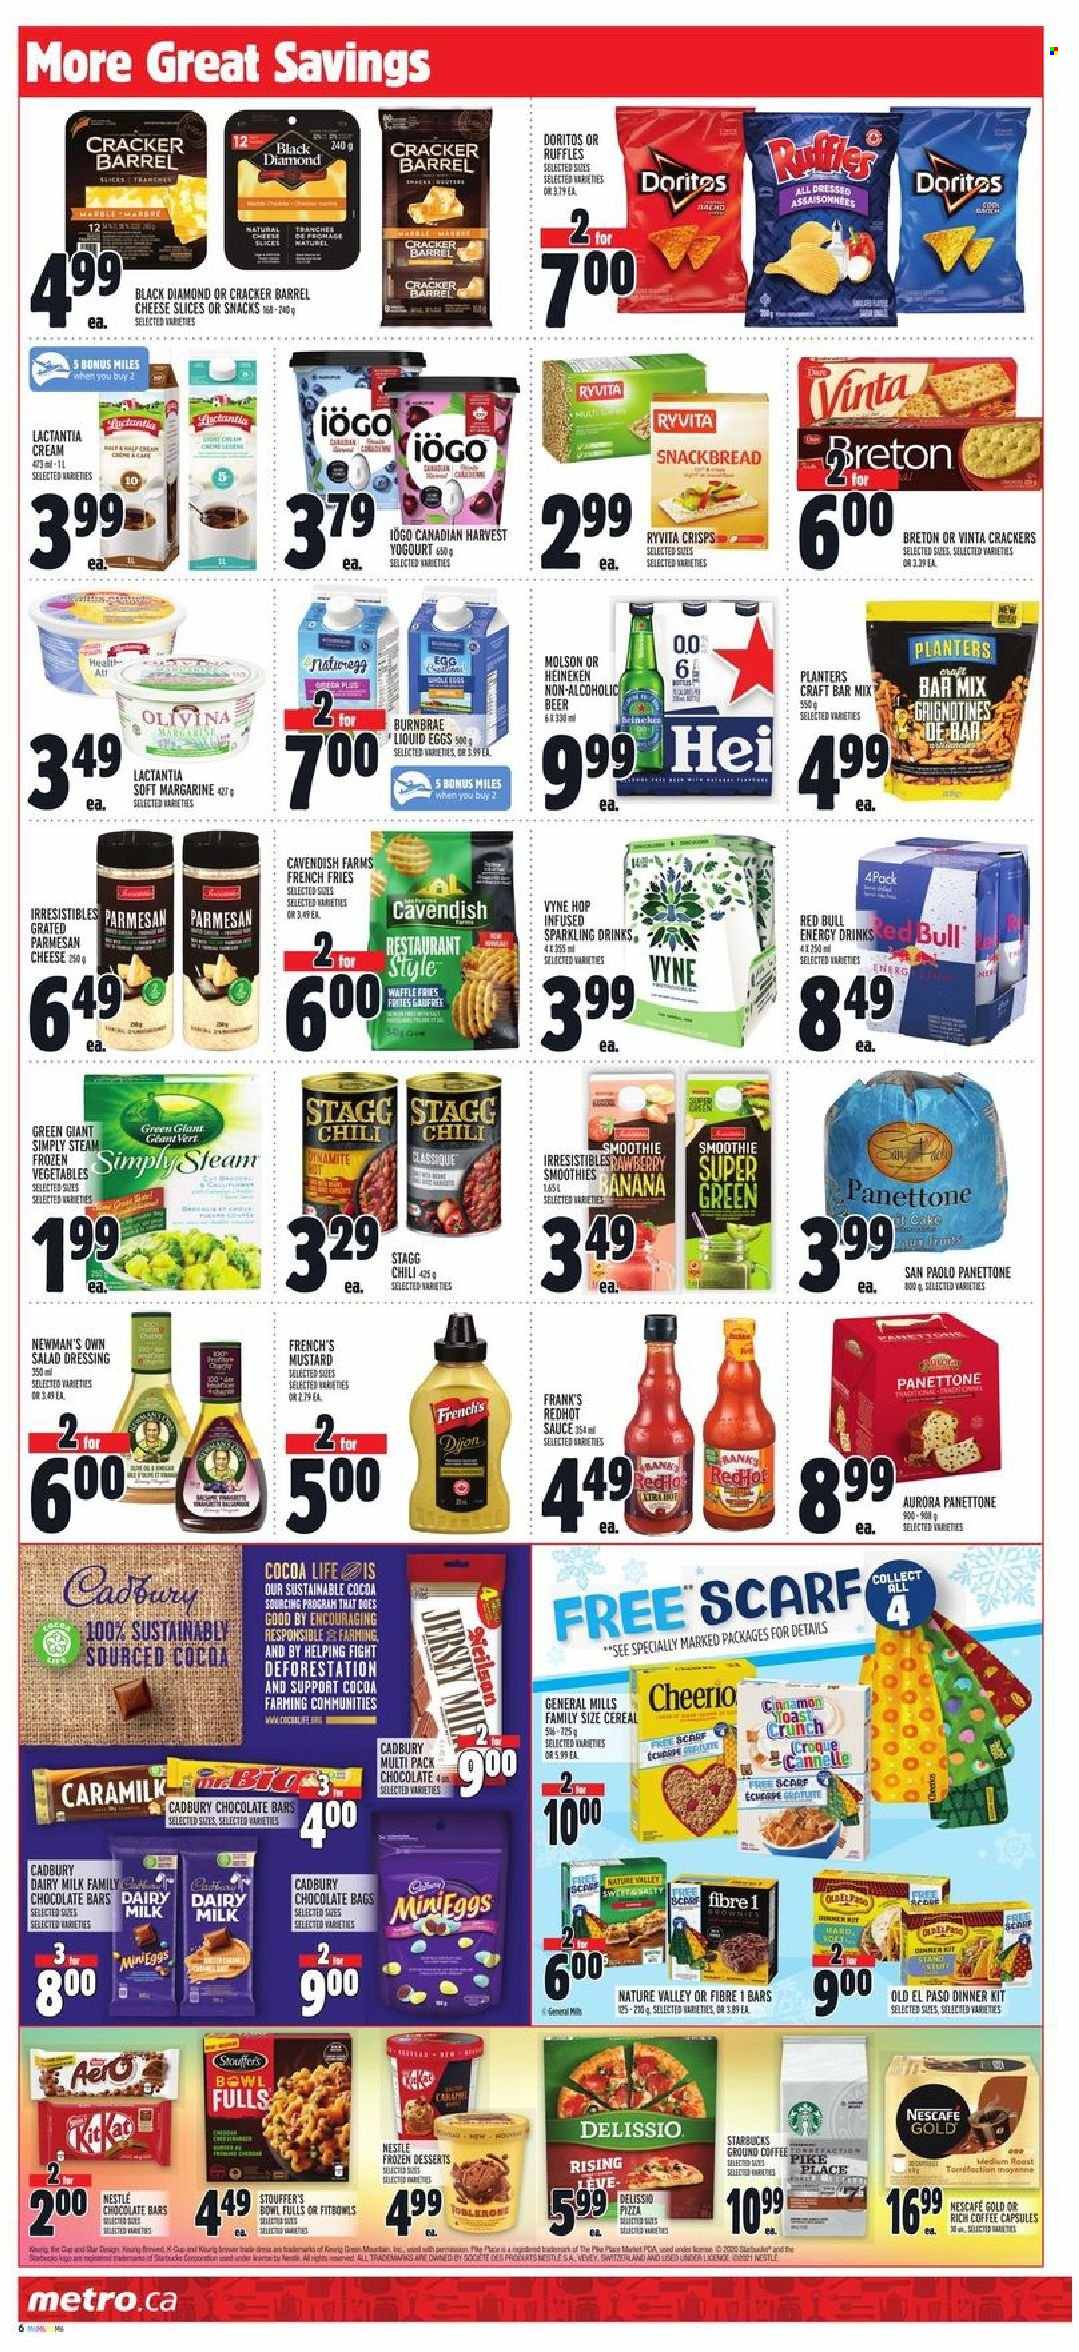 thumbnail - Metro Flyer - October 21, 2021 - October 27, 2021 - Sales products - cake, Old El Paso, panettone, pizza, sauce, dinner kit, sliced cheese, parmesan, margarine, Stouffer's, potato fries, french fries, crackers, Toblerone, Cadbury, Dairy Milk, chocolate bar, Doritos, Ruffles, cereals, Nature Valley, mustard, salad dressing, dressing, Planters, Red Bull, smoothie, coffee, coffee capsules, Starbucks, beer, Heineken, bowl, Nestlé, Nescafé. Page 7.